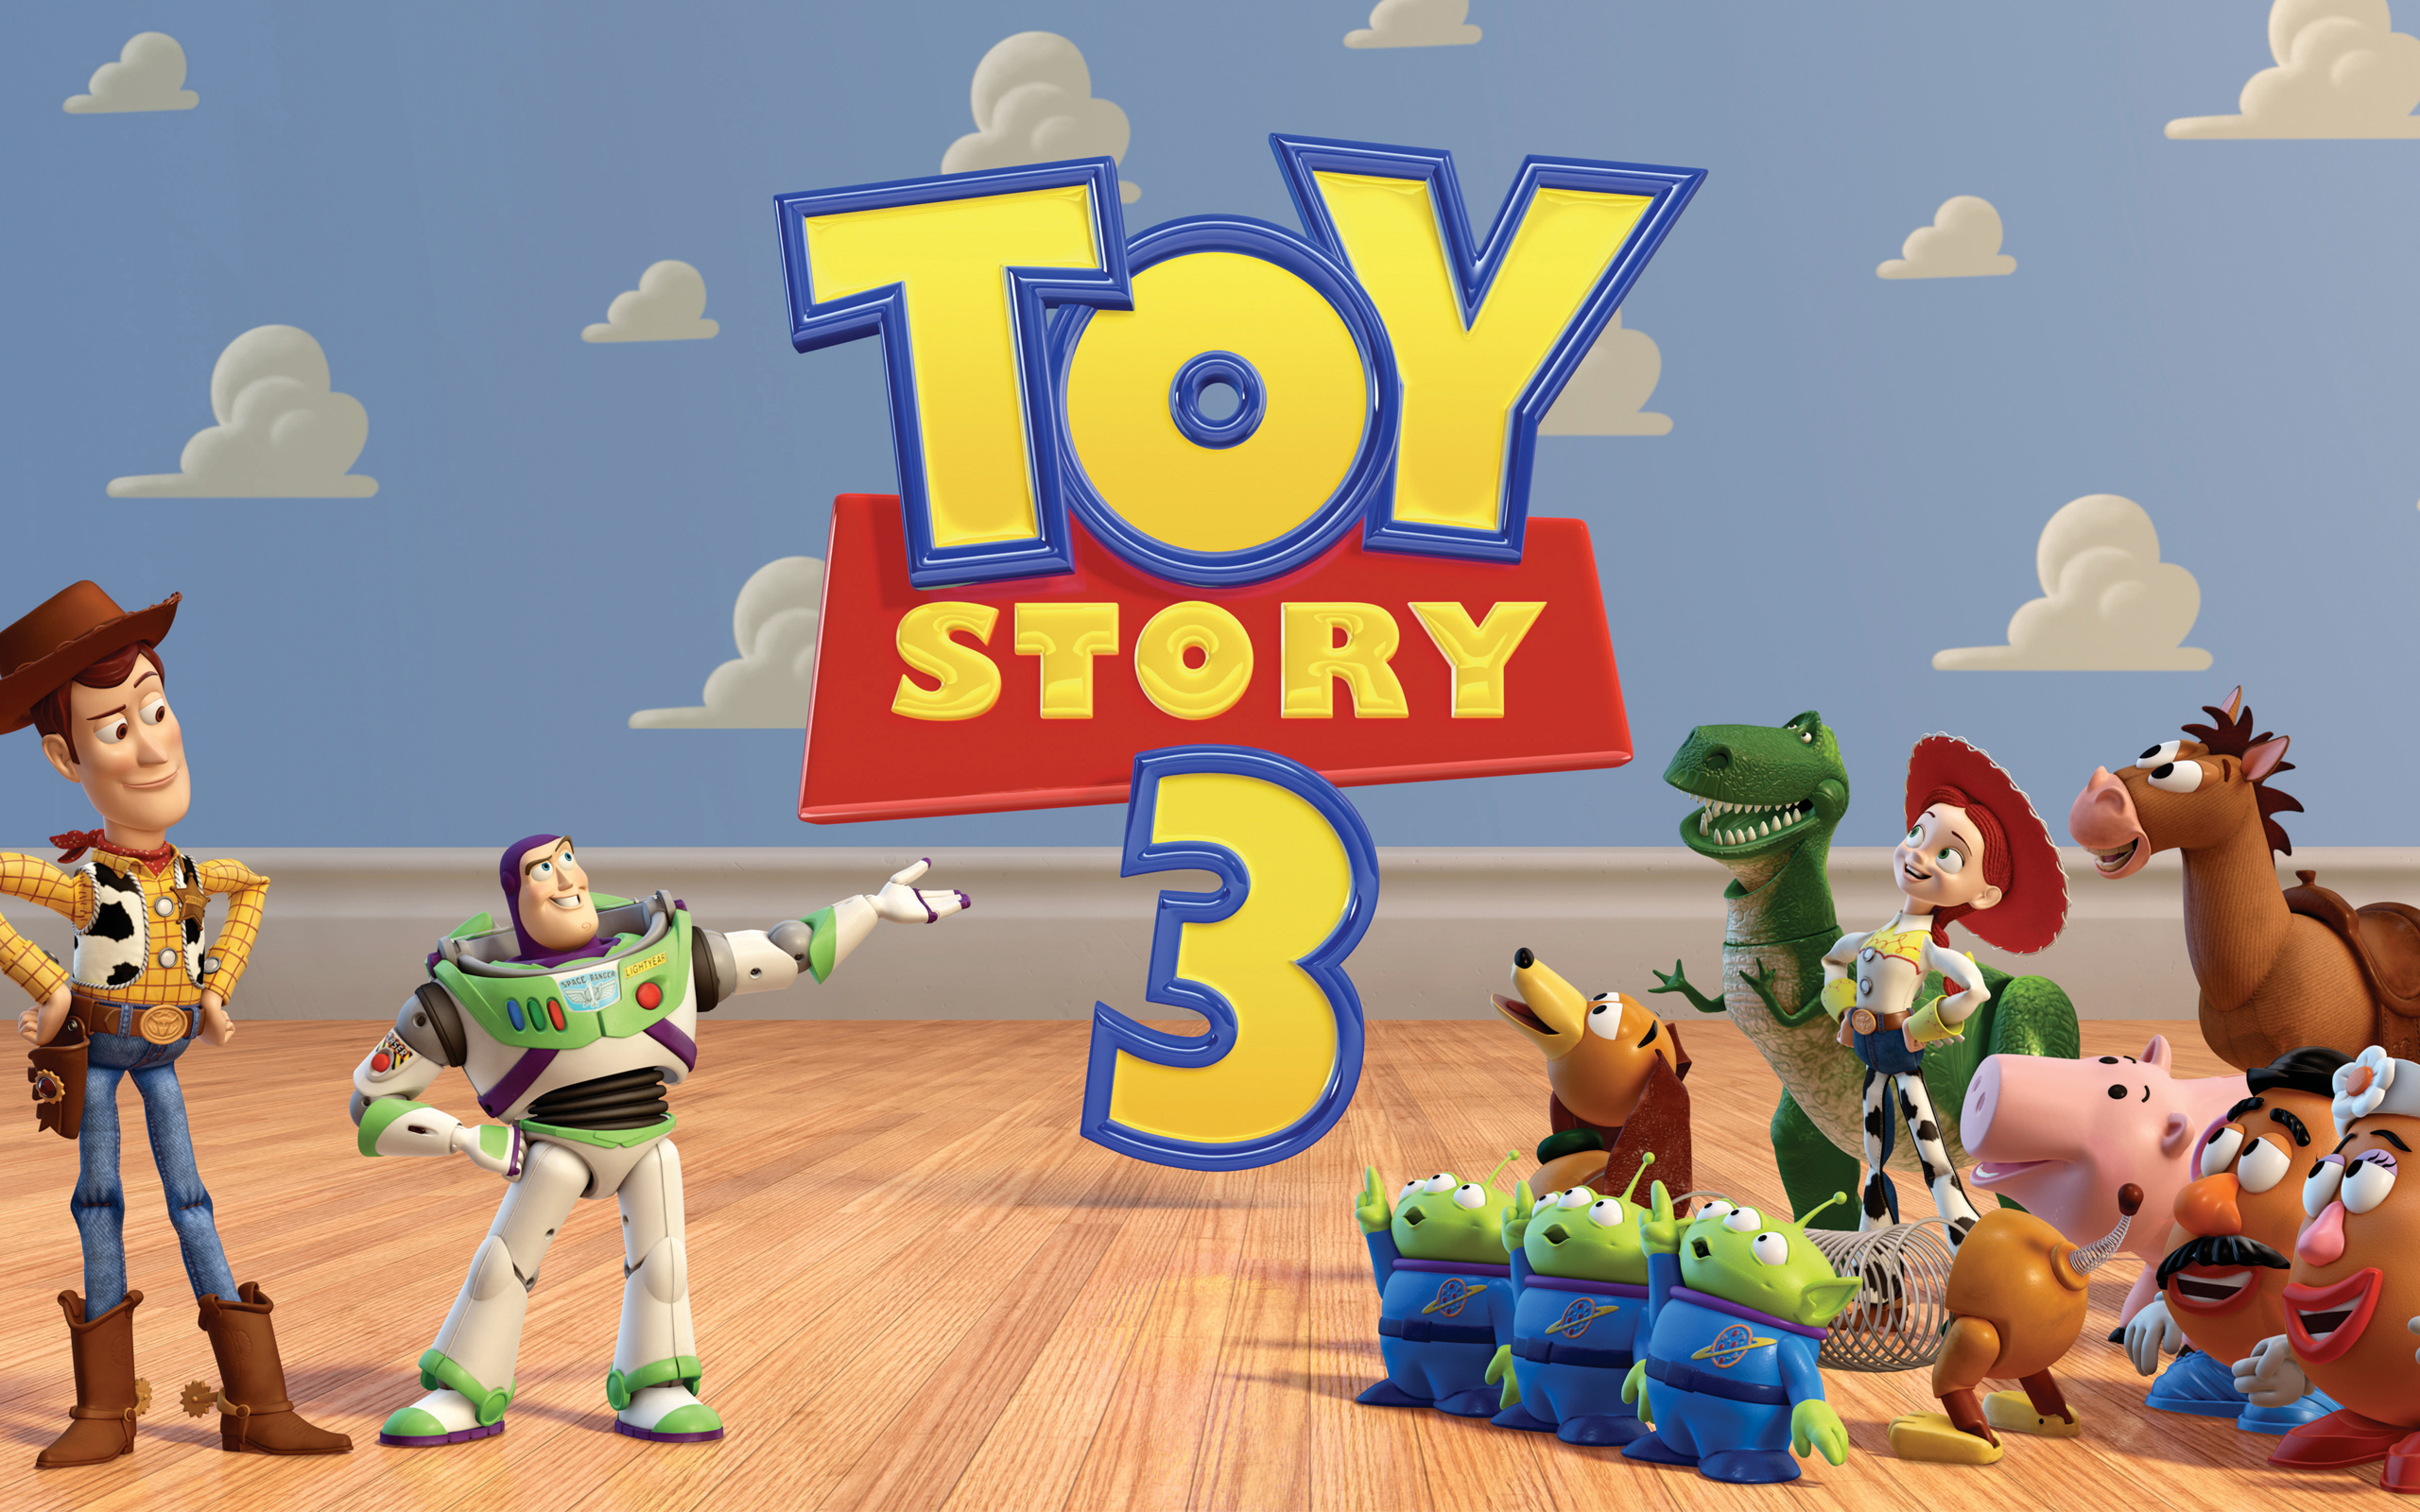 Download Toy Story Clouds Wallpaper 1231 1920x1080 px High resolution